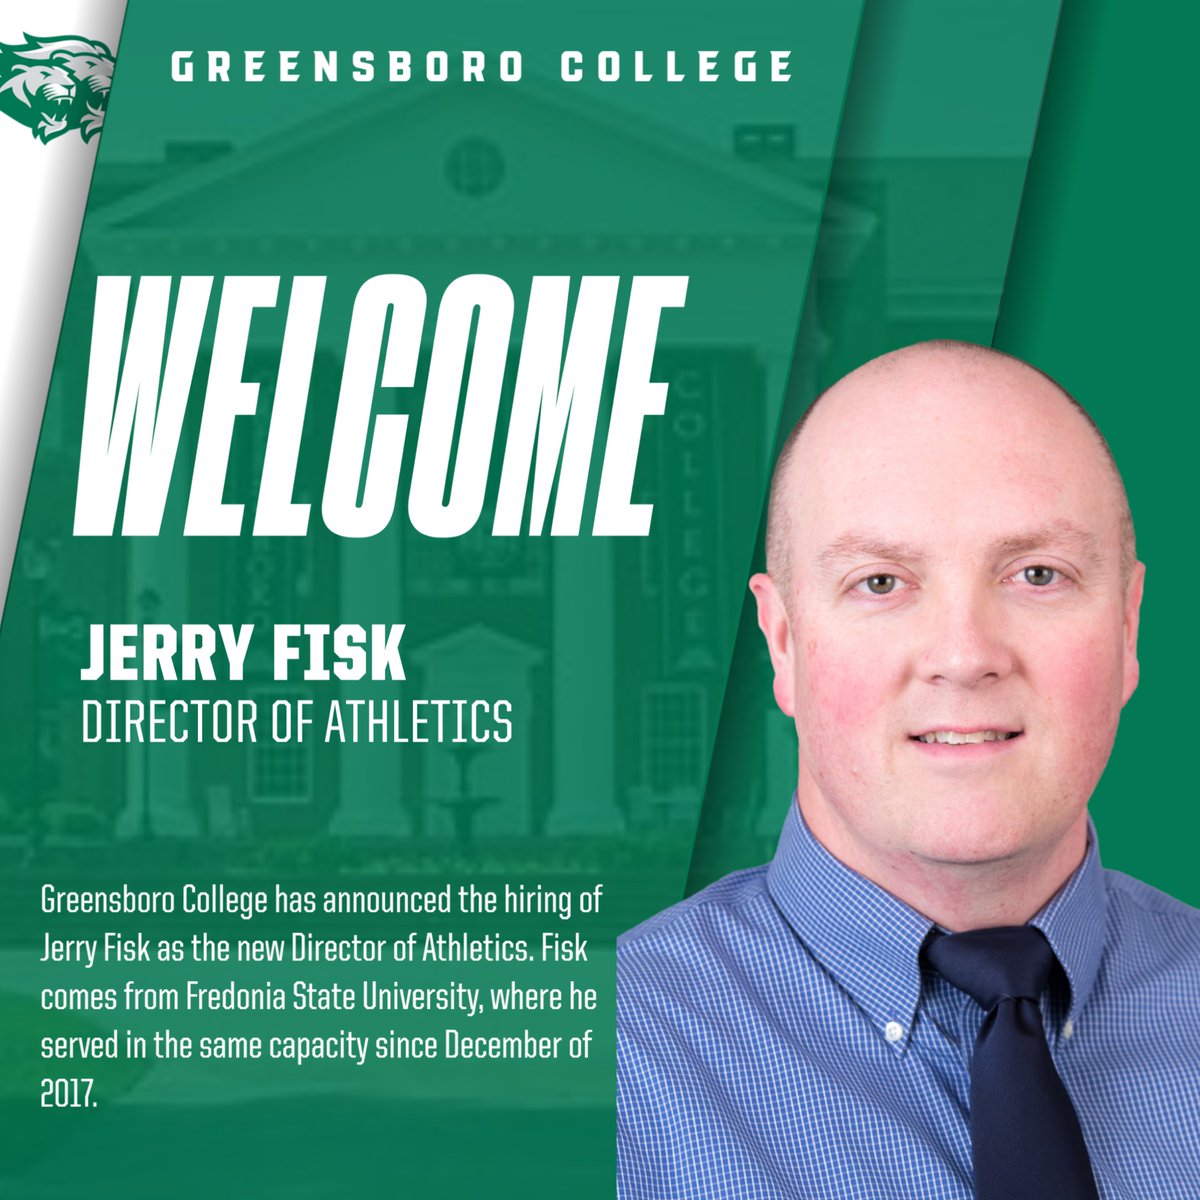 Greensboro College has announced the hiring of Jerry Fisk as new Director of Athletics beginning summer of 2024!

Fisk comes to Greensboro from Fredonia State University (NY) where he served in the same capacity. Check out the full press release at greensborocollegesports.com.